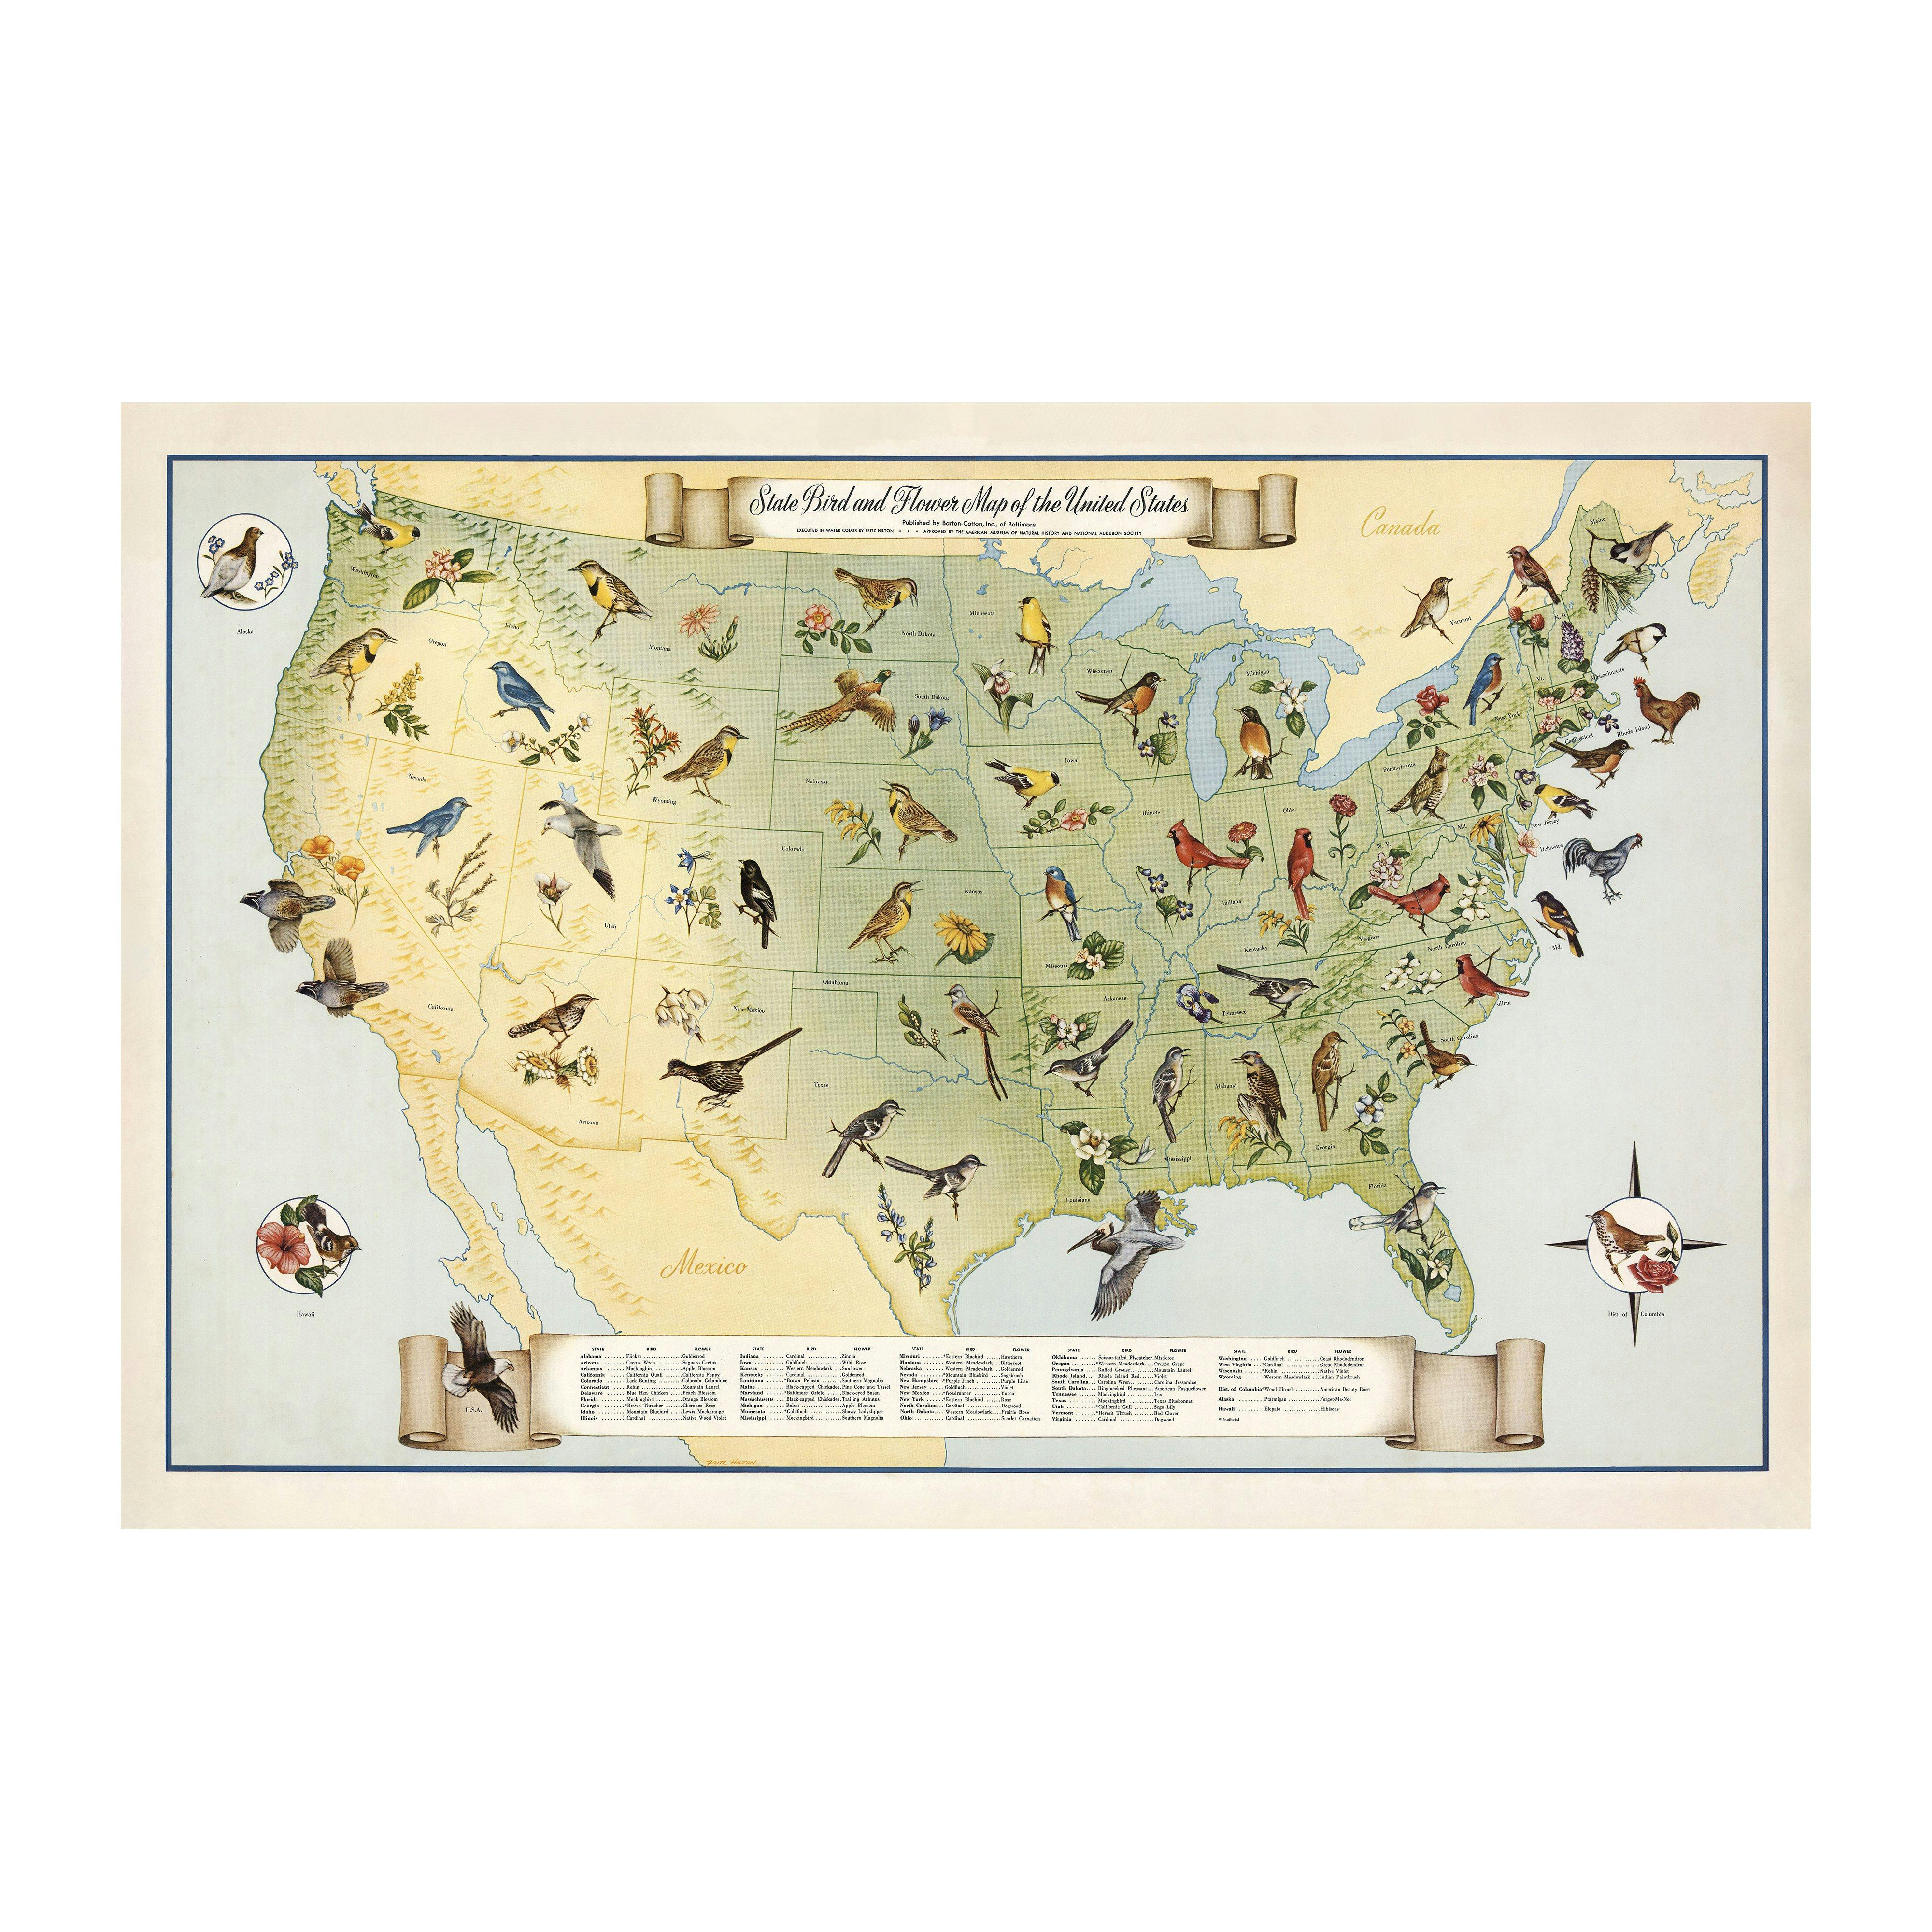 State Birds and Flowers of USA Map 1965